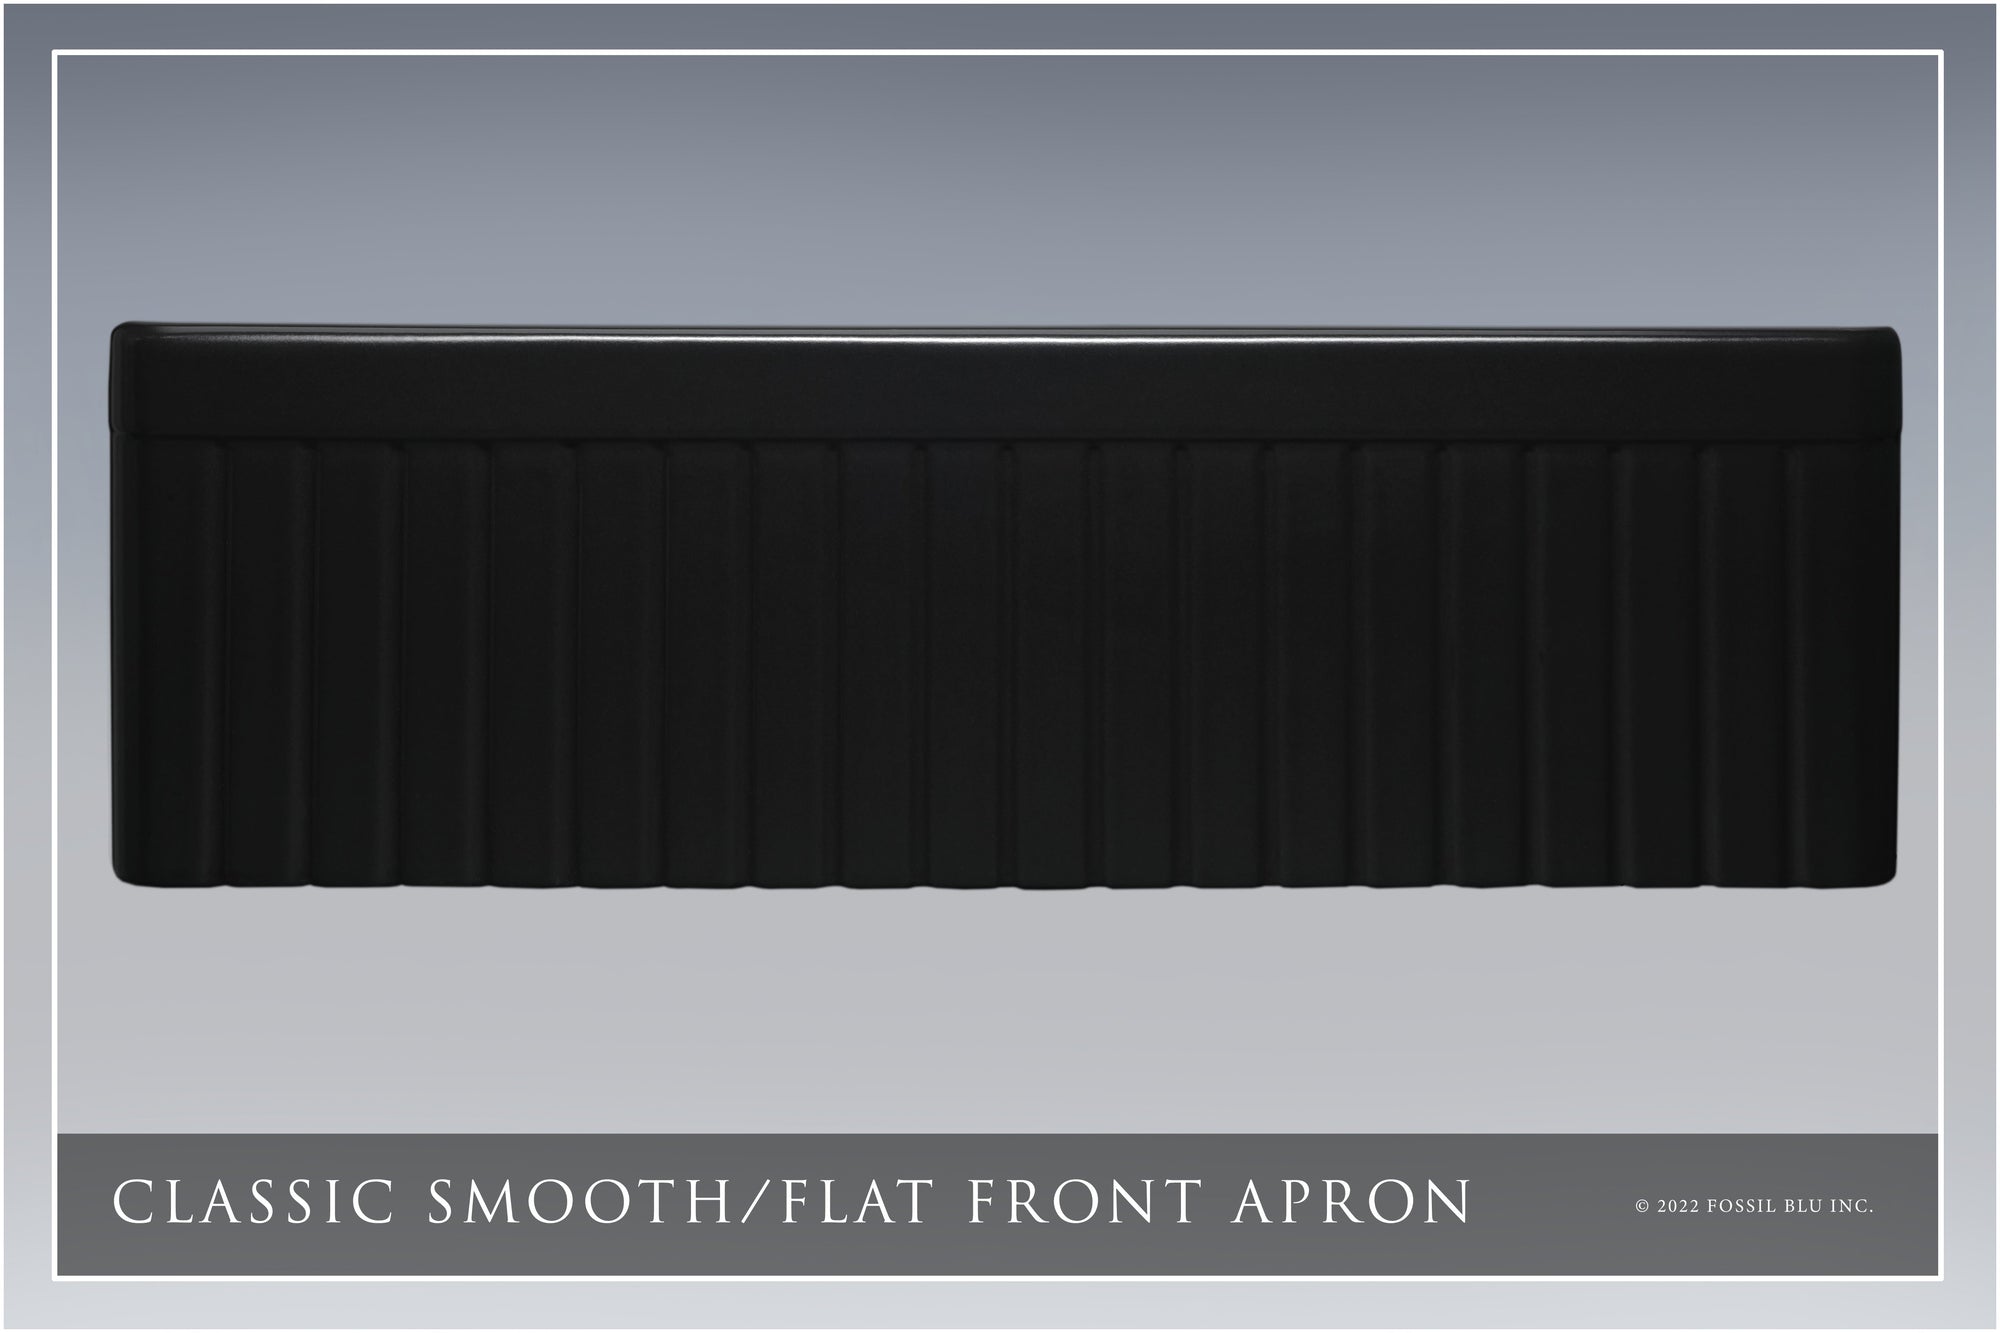 FSW1027 LUXURY 33-INCH SOLID FIRECLAY FARMHOUSE SINK, MATTE BLACK, ST. STEEL ACCS, FLUTED FRONT